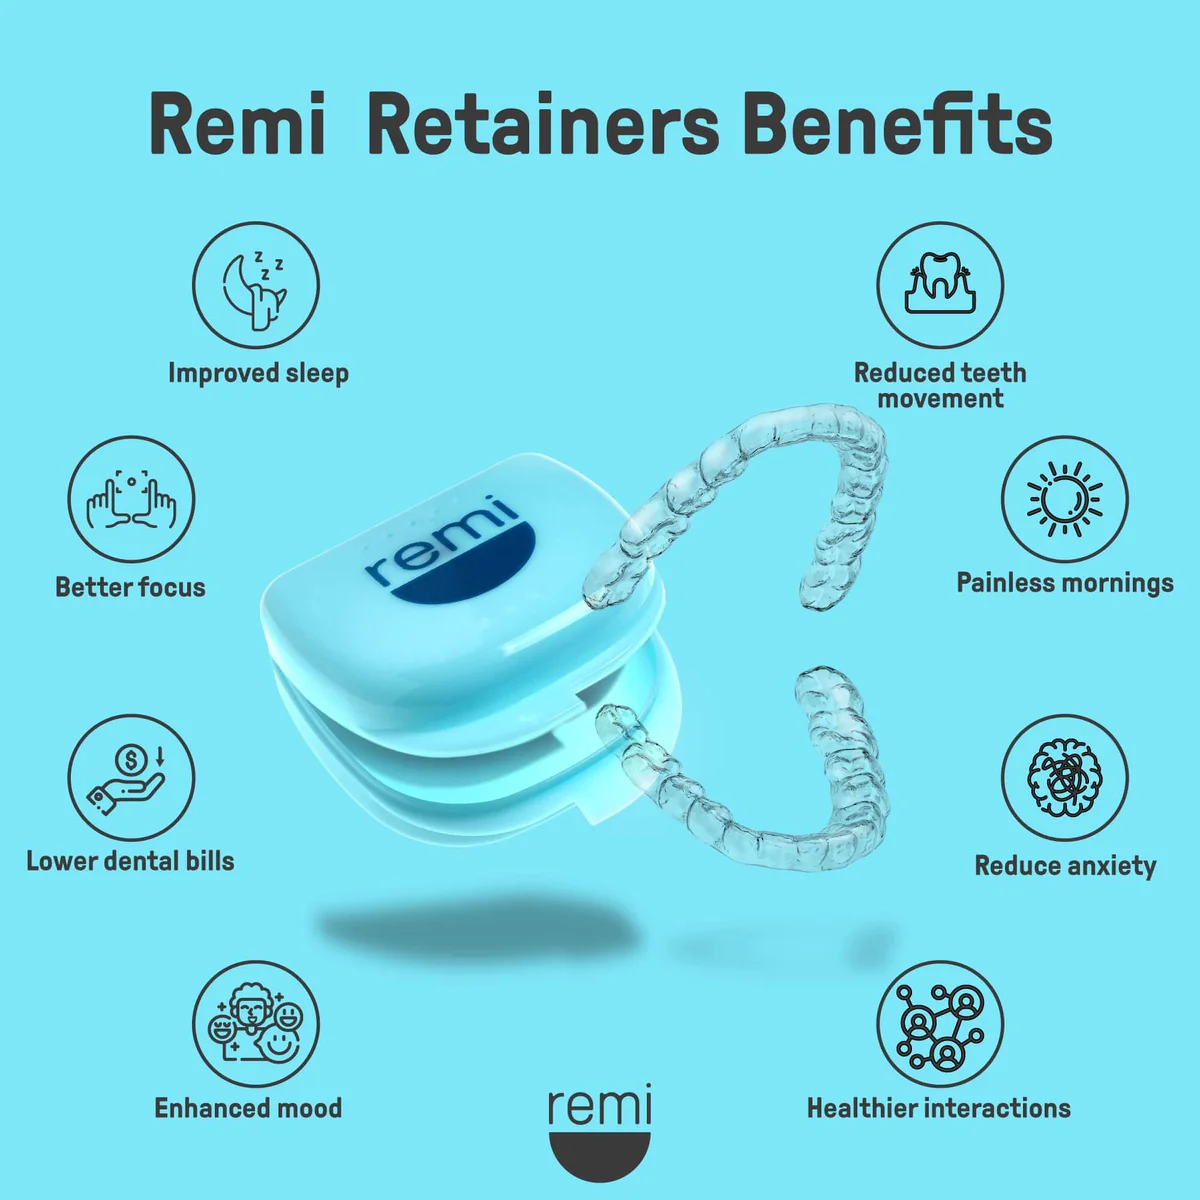 Benefits of Remi retainers